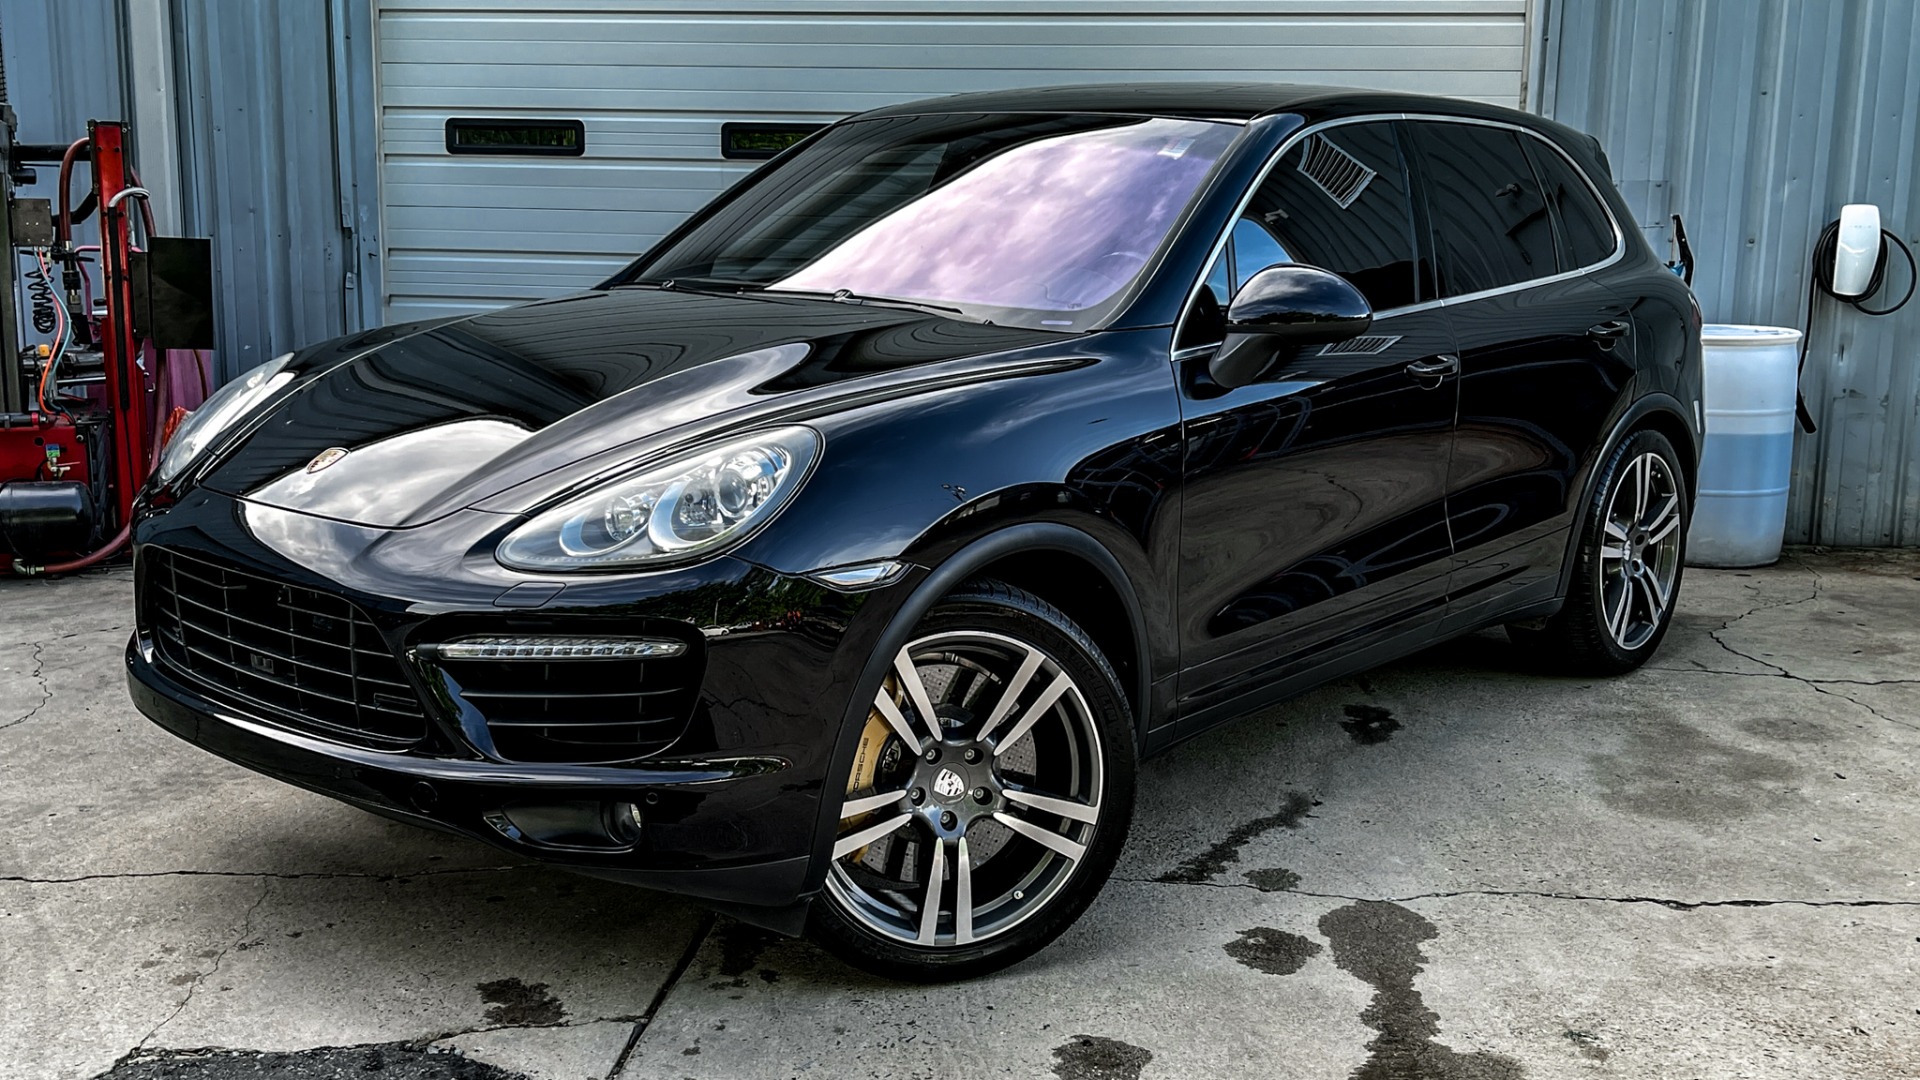 Used 2011 Porsche Cayenne Turbo / CARBON CERAMICS / CARBON FIBER TRIM / 21IN WHEELS / PREMIUM PACKAGE for sale $33,000 at Formula Imports in Charlotte NC 28227 69